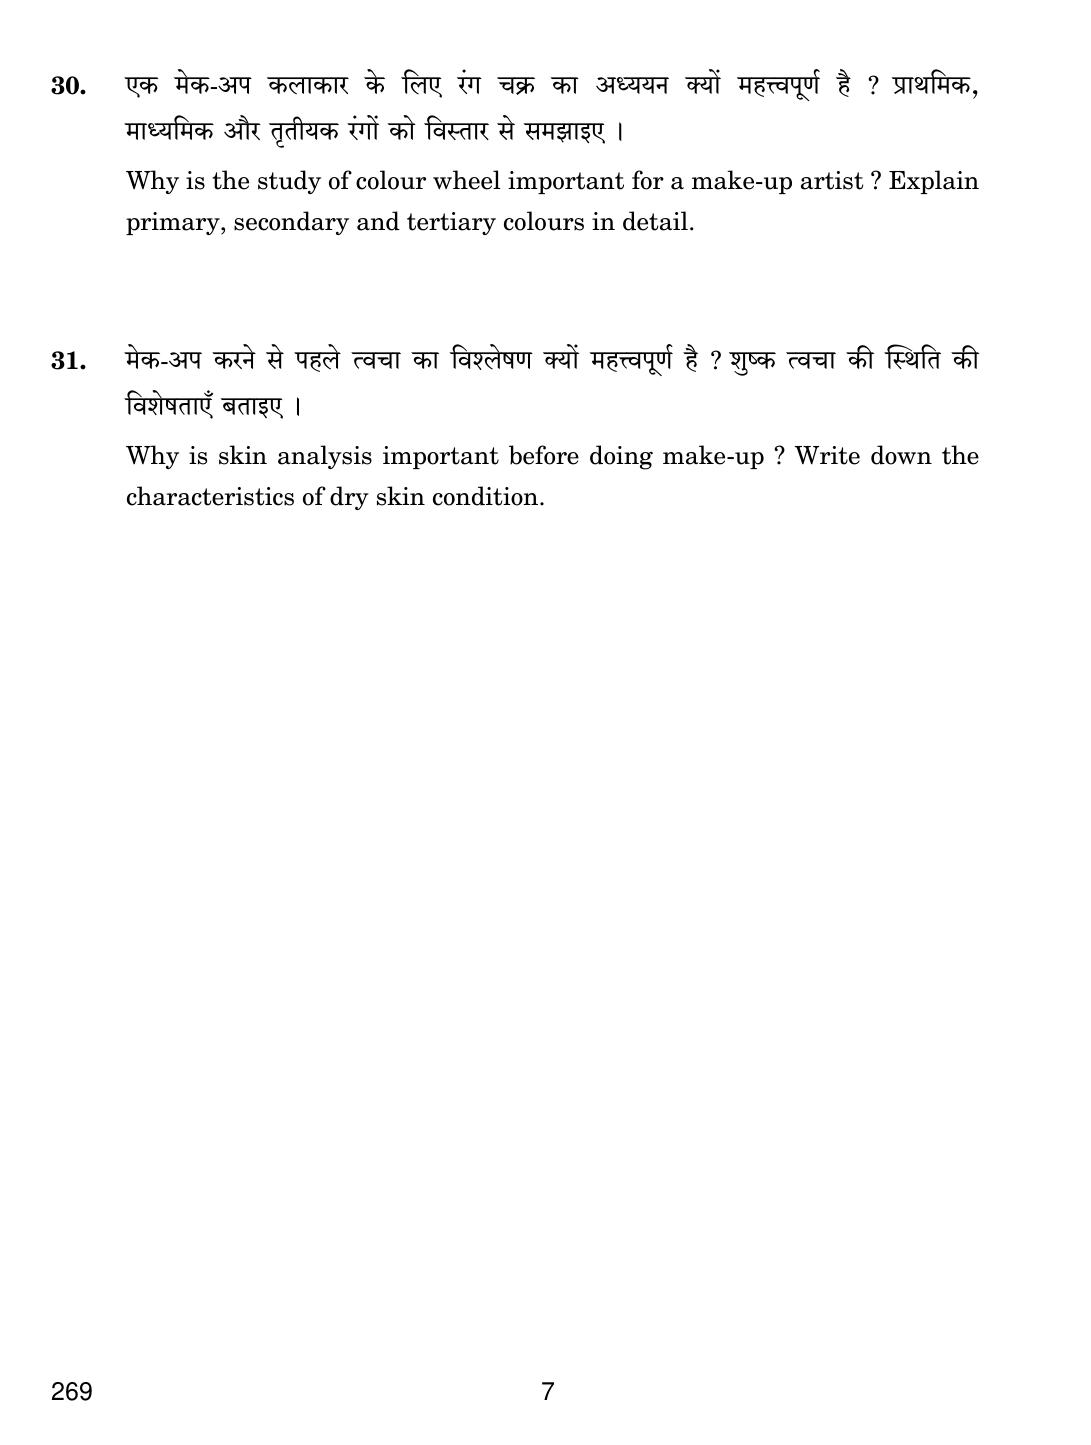 CBSE Class 12 269 Beauty And Hair 2019 Question Paper - Page 7